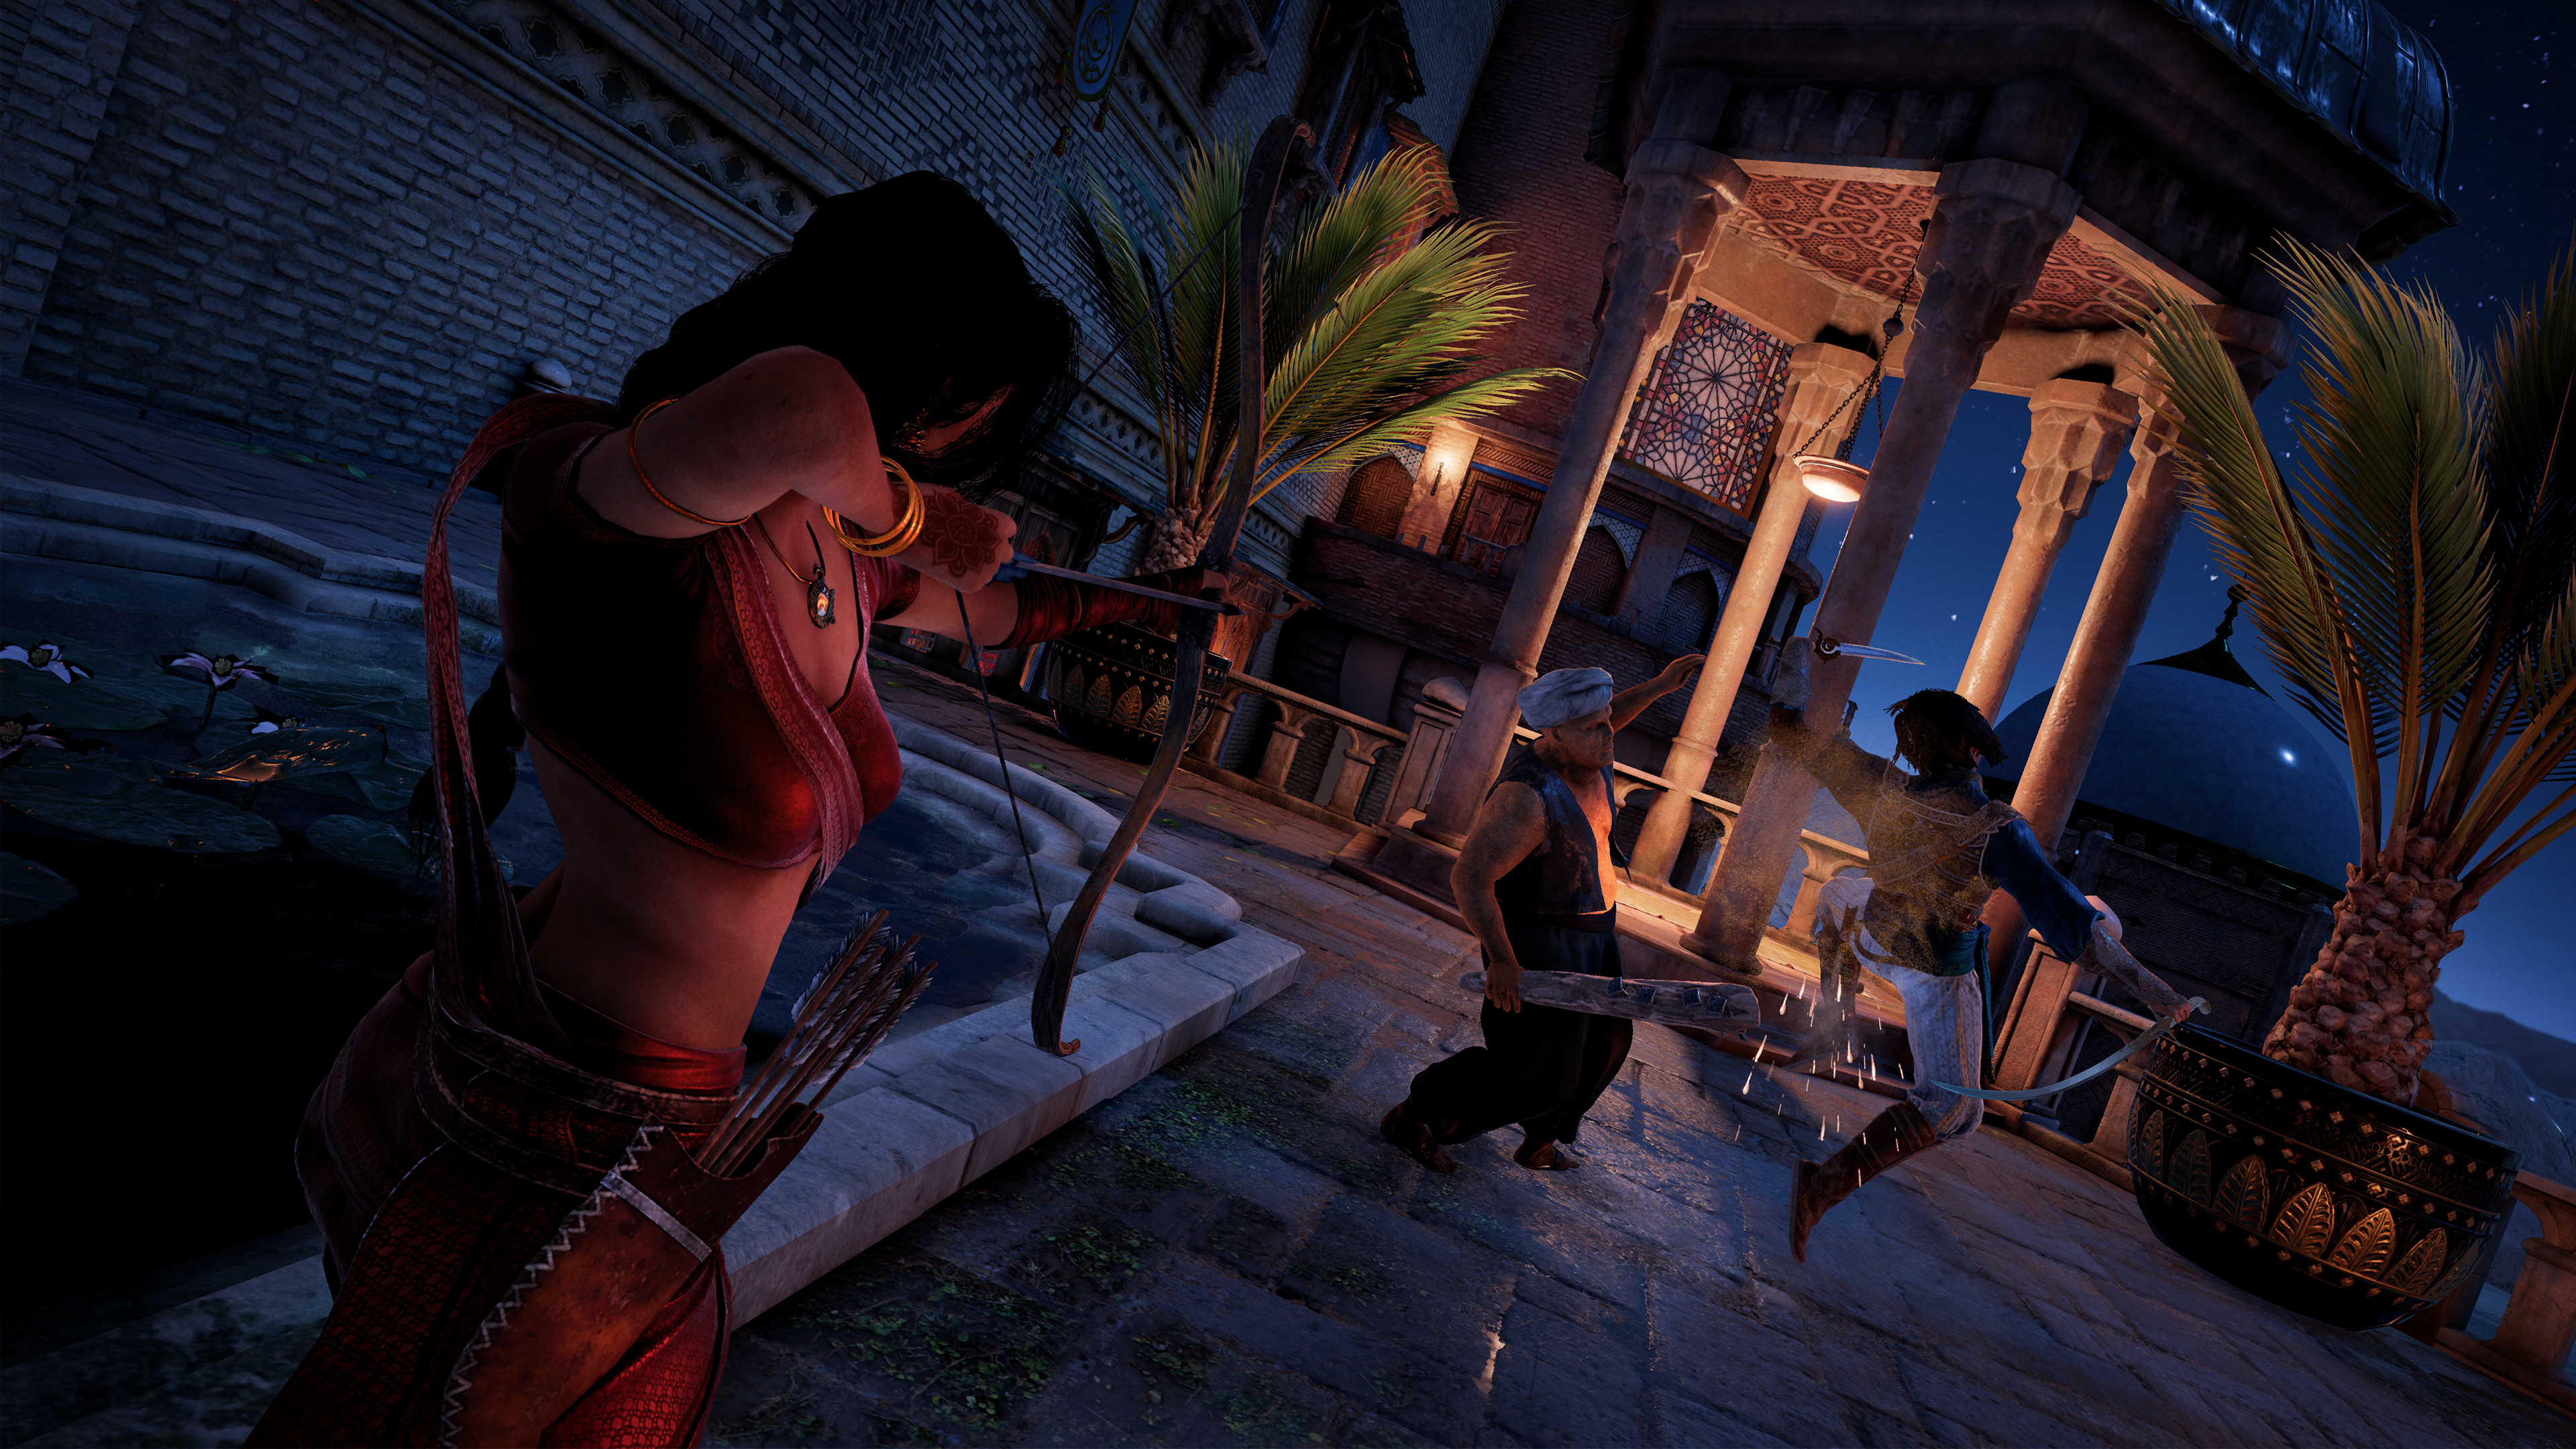 Prince of Persia: The Sands of Time Remake Announced